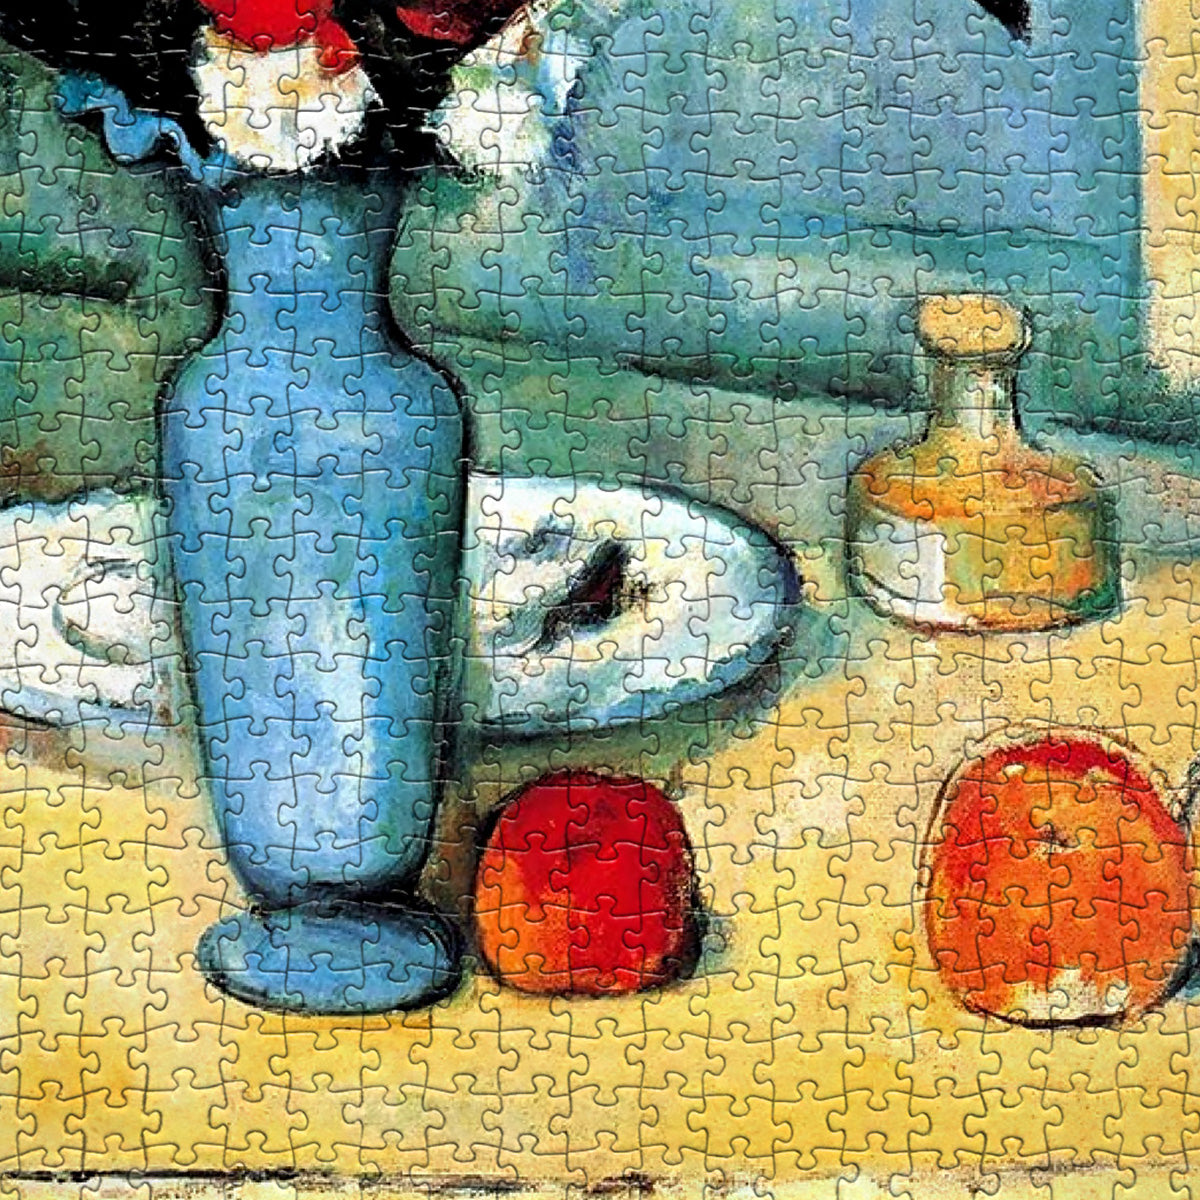 Dive into the world of fine art with the difficult 1000-piece Paul Cezanne Blue Vase jigsaw puzzle by Eurographics.